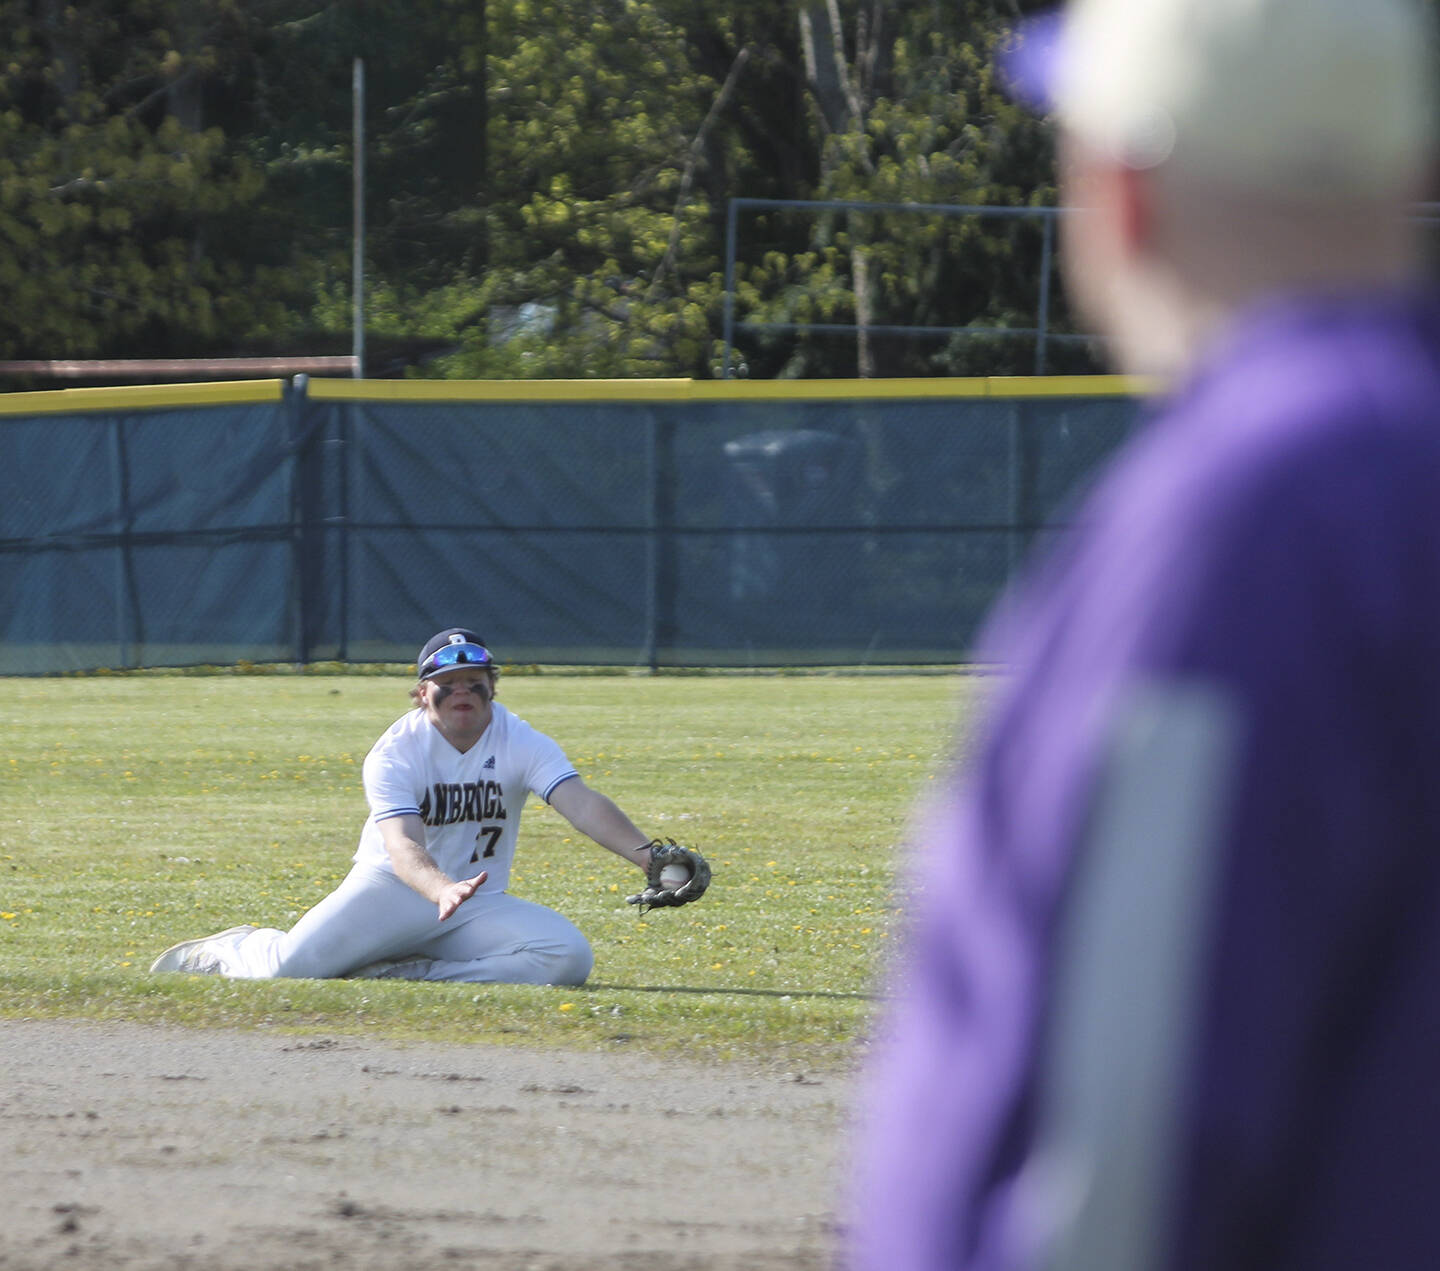 Spartan second baseman Joey Hildebrandt makes a diving play but wasn’t able to throw out the NK runner from that position, resulting in an infield hit.